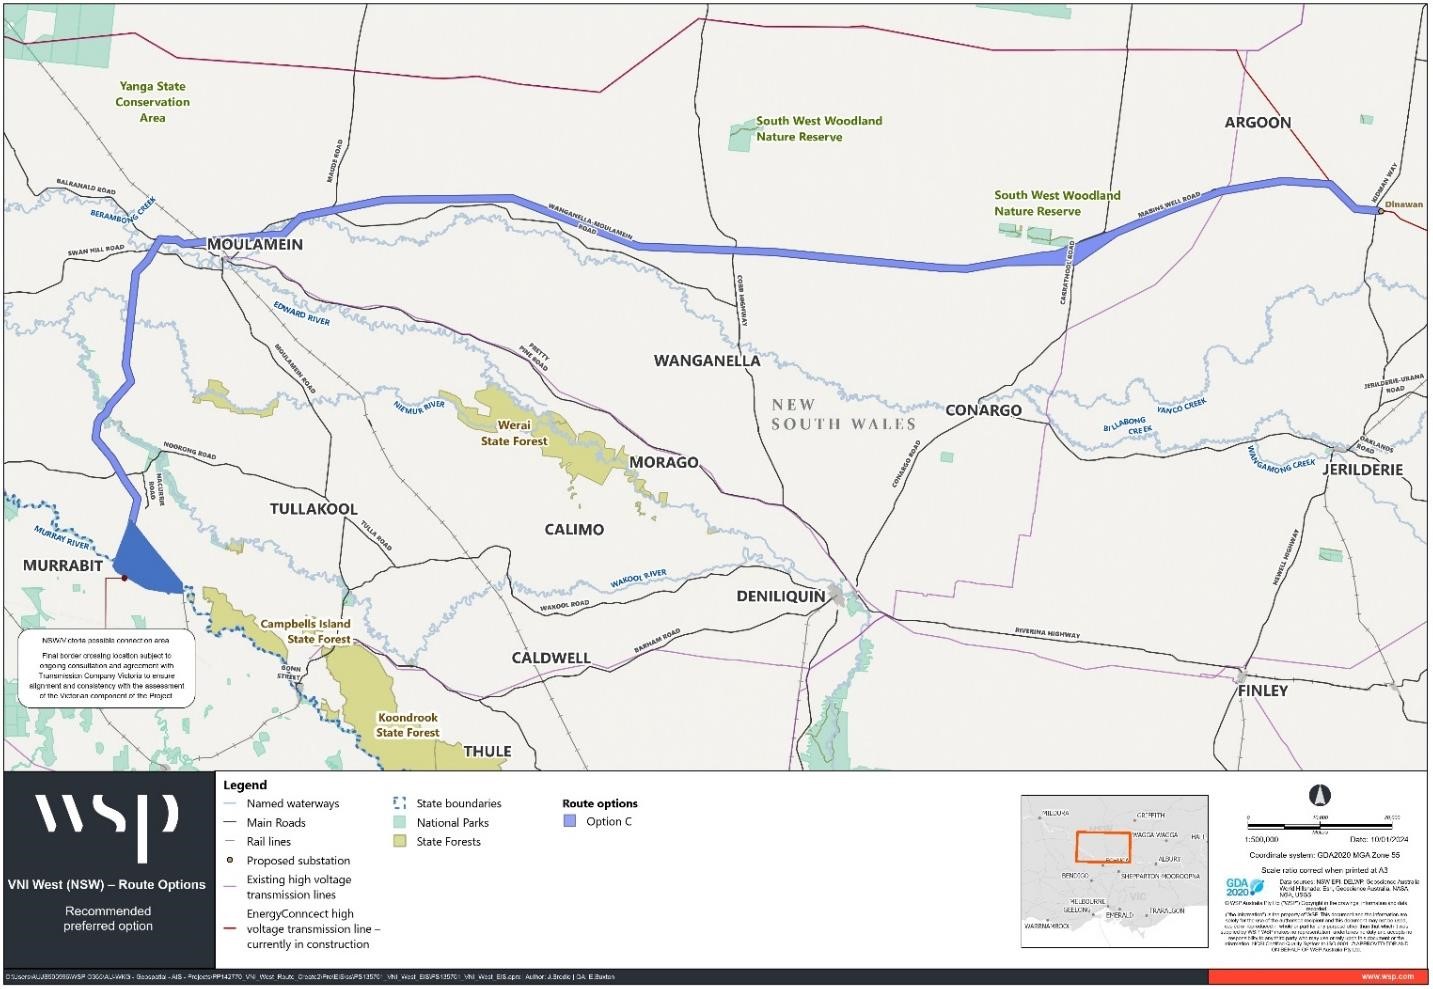 A map showing a proposed section of the VNI West project.